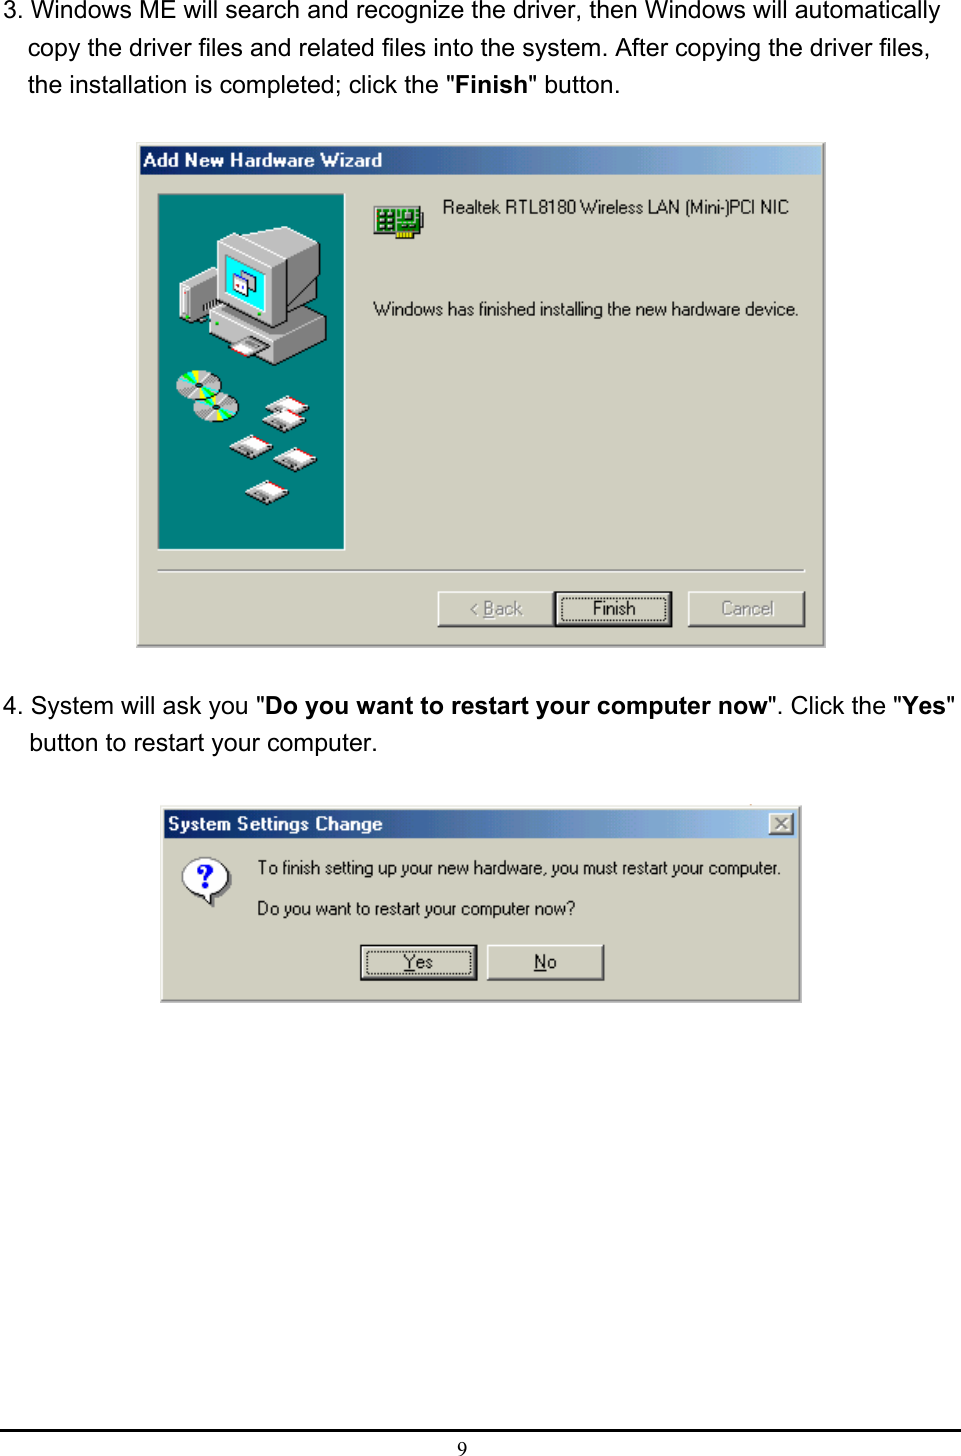  9  3. Windows ME will search and recognize the driver, then Windows will automatically copy the driver files and related files into the system. After copying the driver files, the installation is completed; click the &quot;Finish&quot; button.    4. System will ask you &quot;Do you want to restart your computer now&quot;. Click the &quot;Yes&quot; button to restart your computer.  